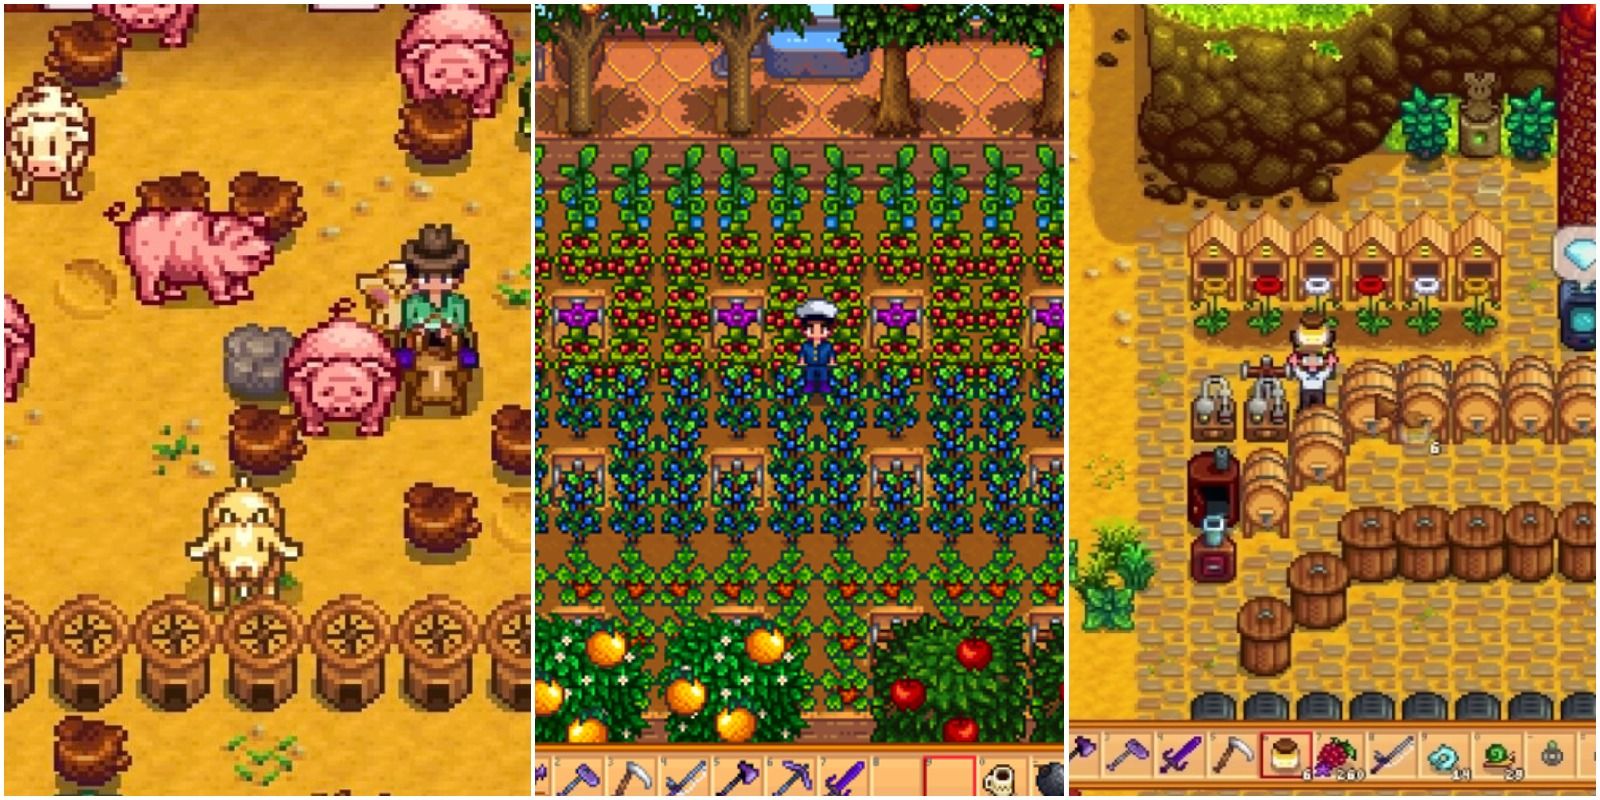 Pigs, the greenhouse, and bee houses